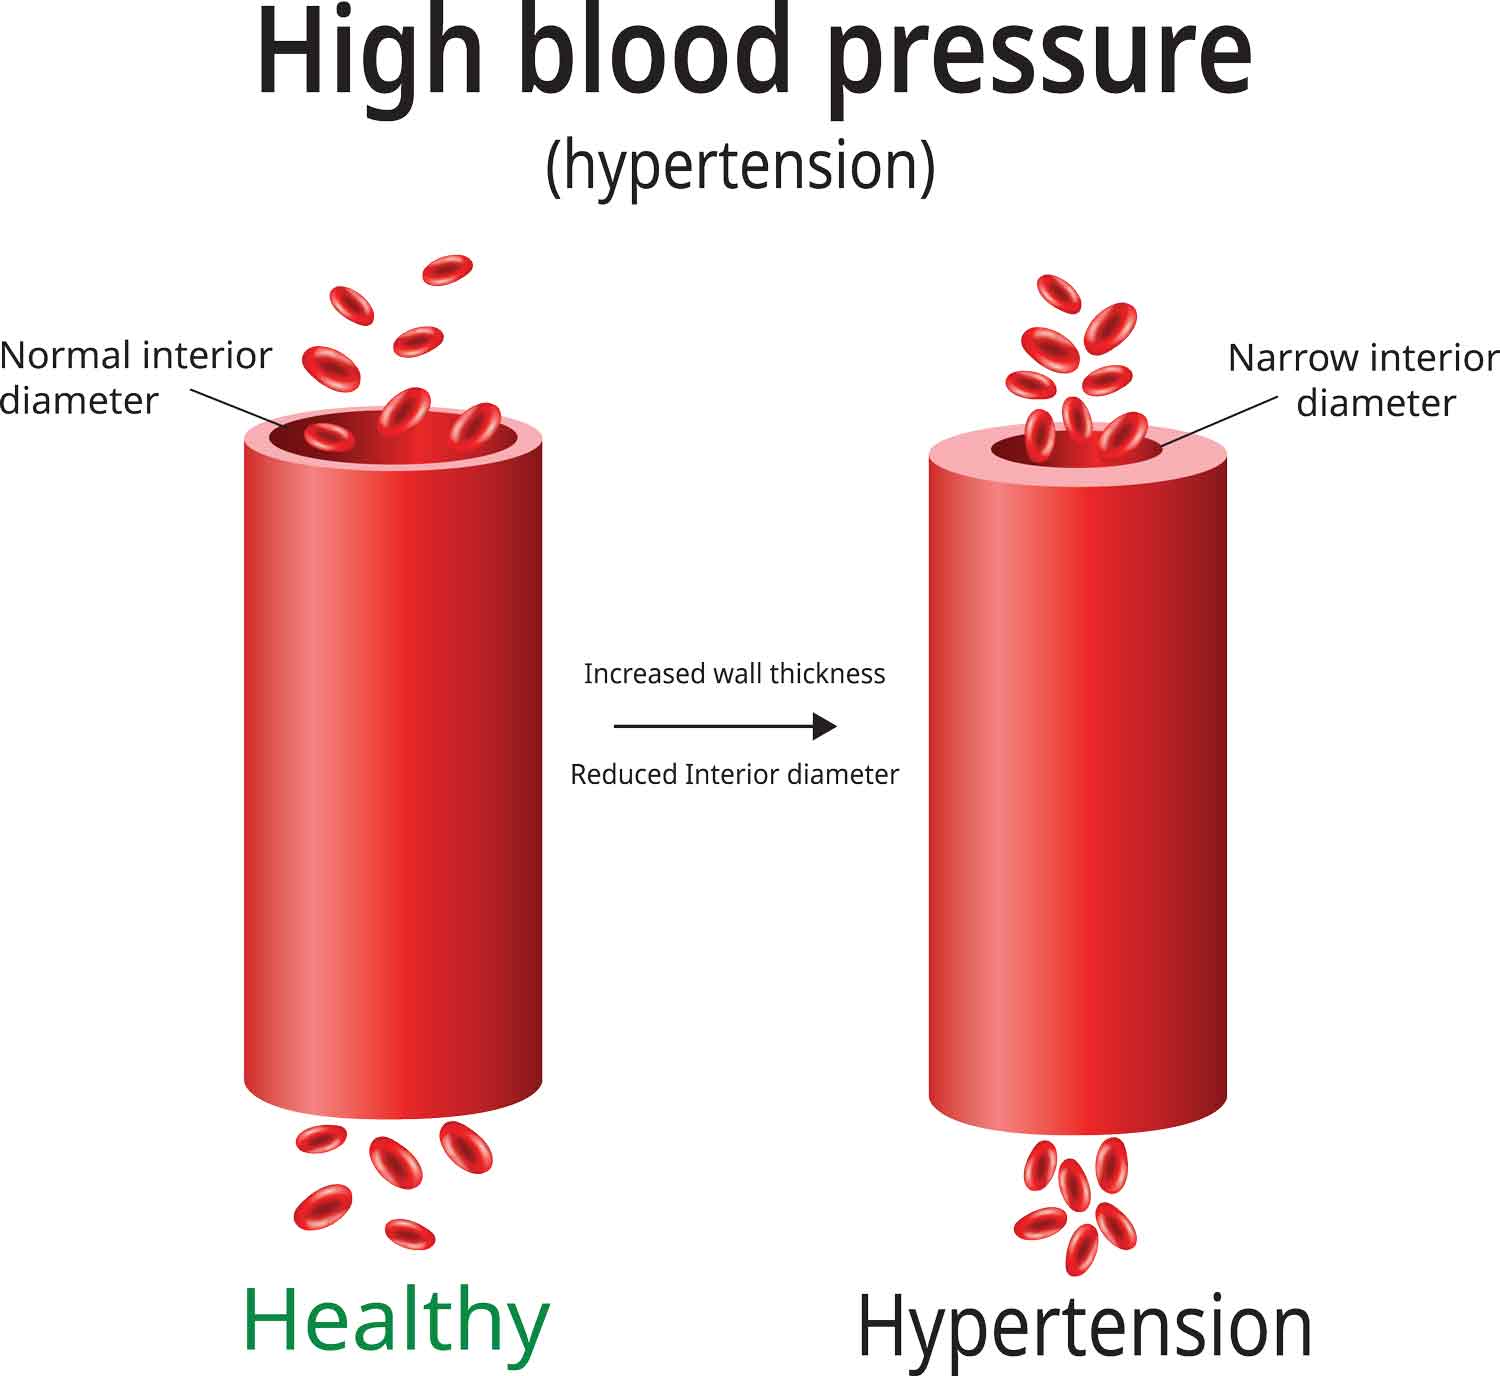 two blood vessels - one healthy and one with hypertension